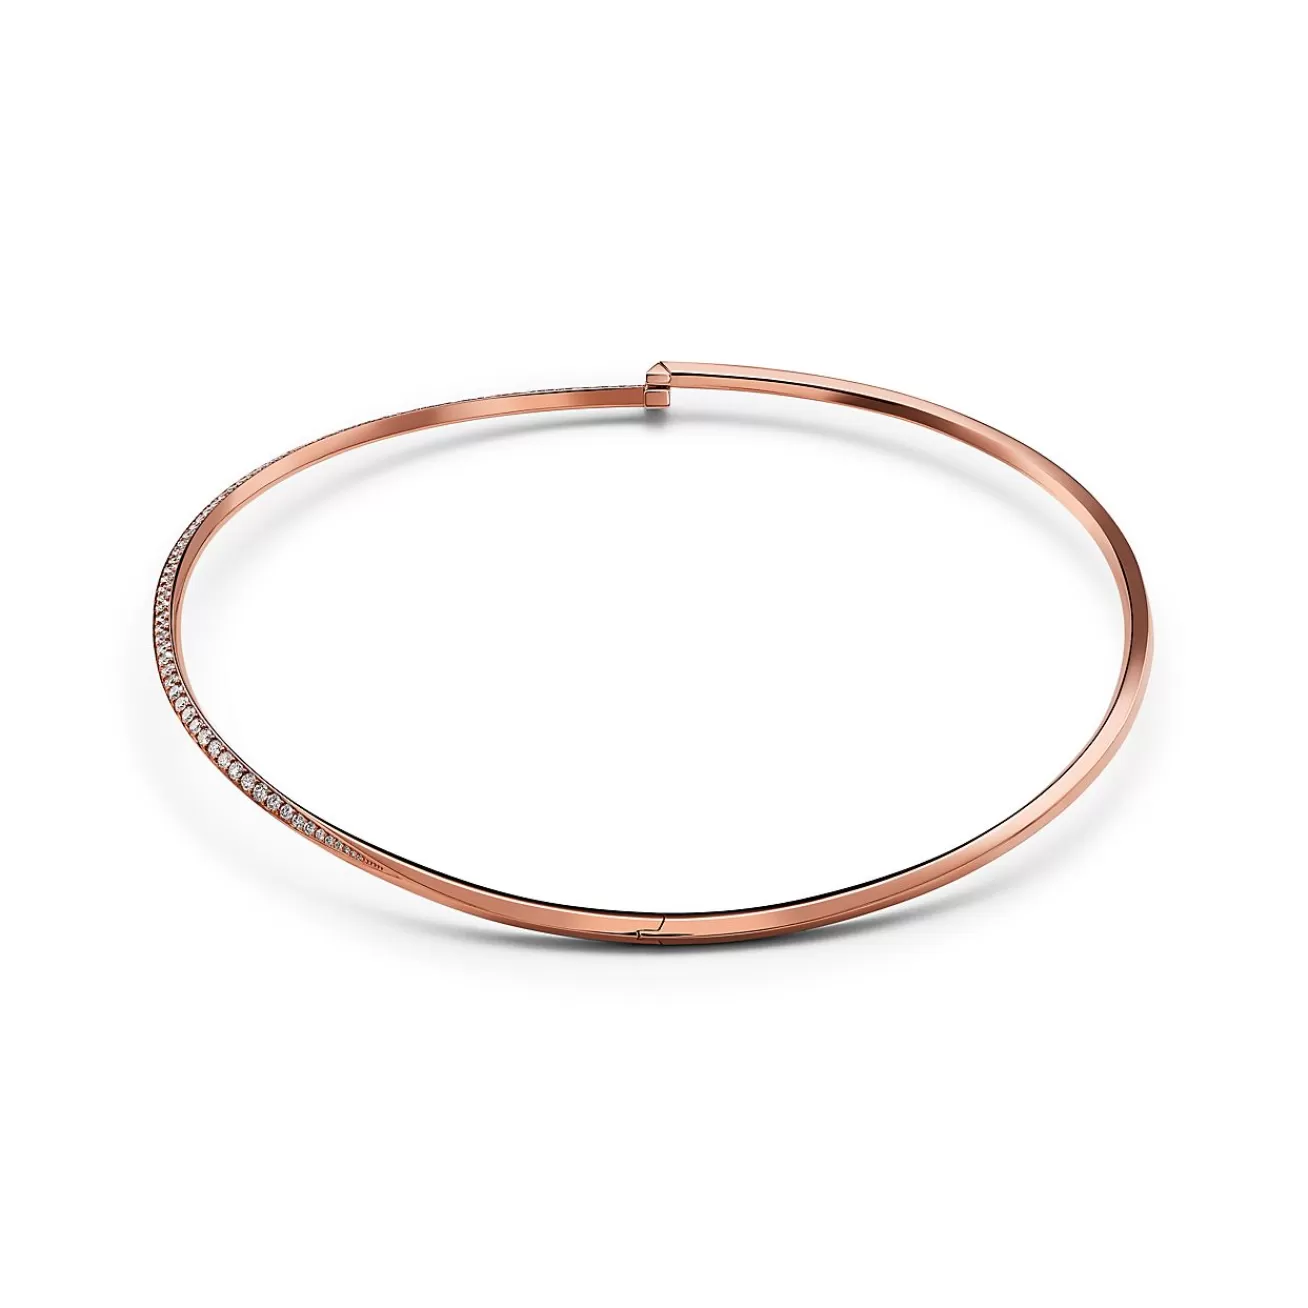 Tiffany & Co. Tiffany T T1 Half Diamond Necklace in Rose Gold | ^ Necklaces & Pendants | Rose Gold Jewelry